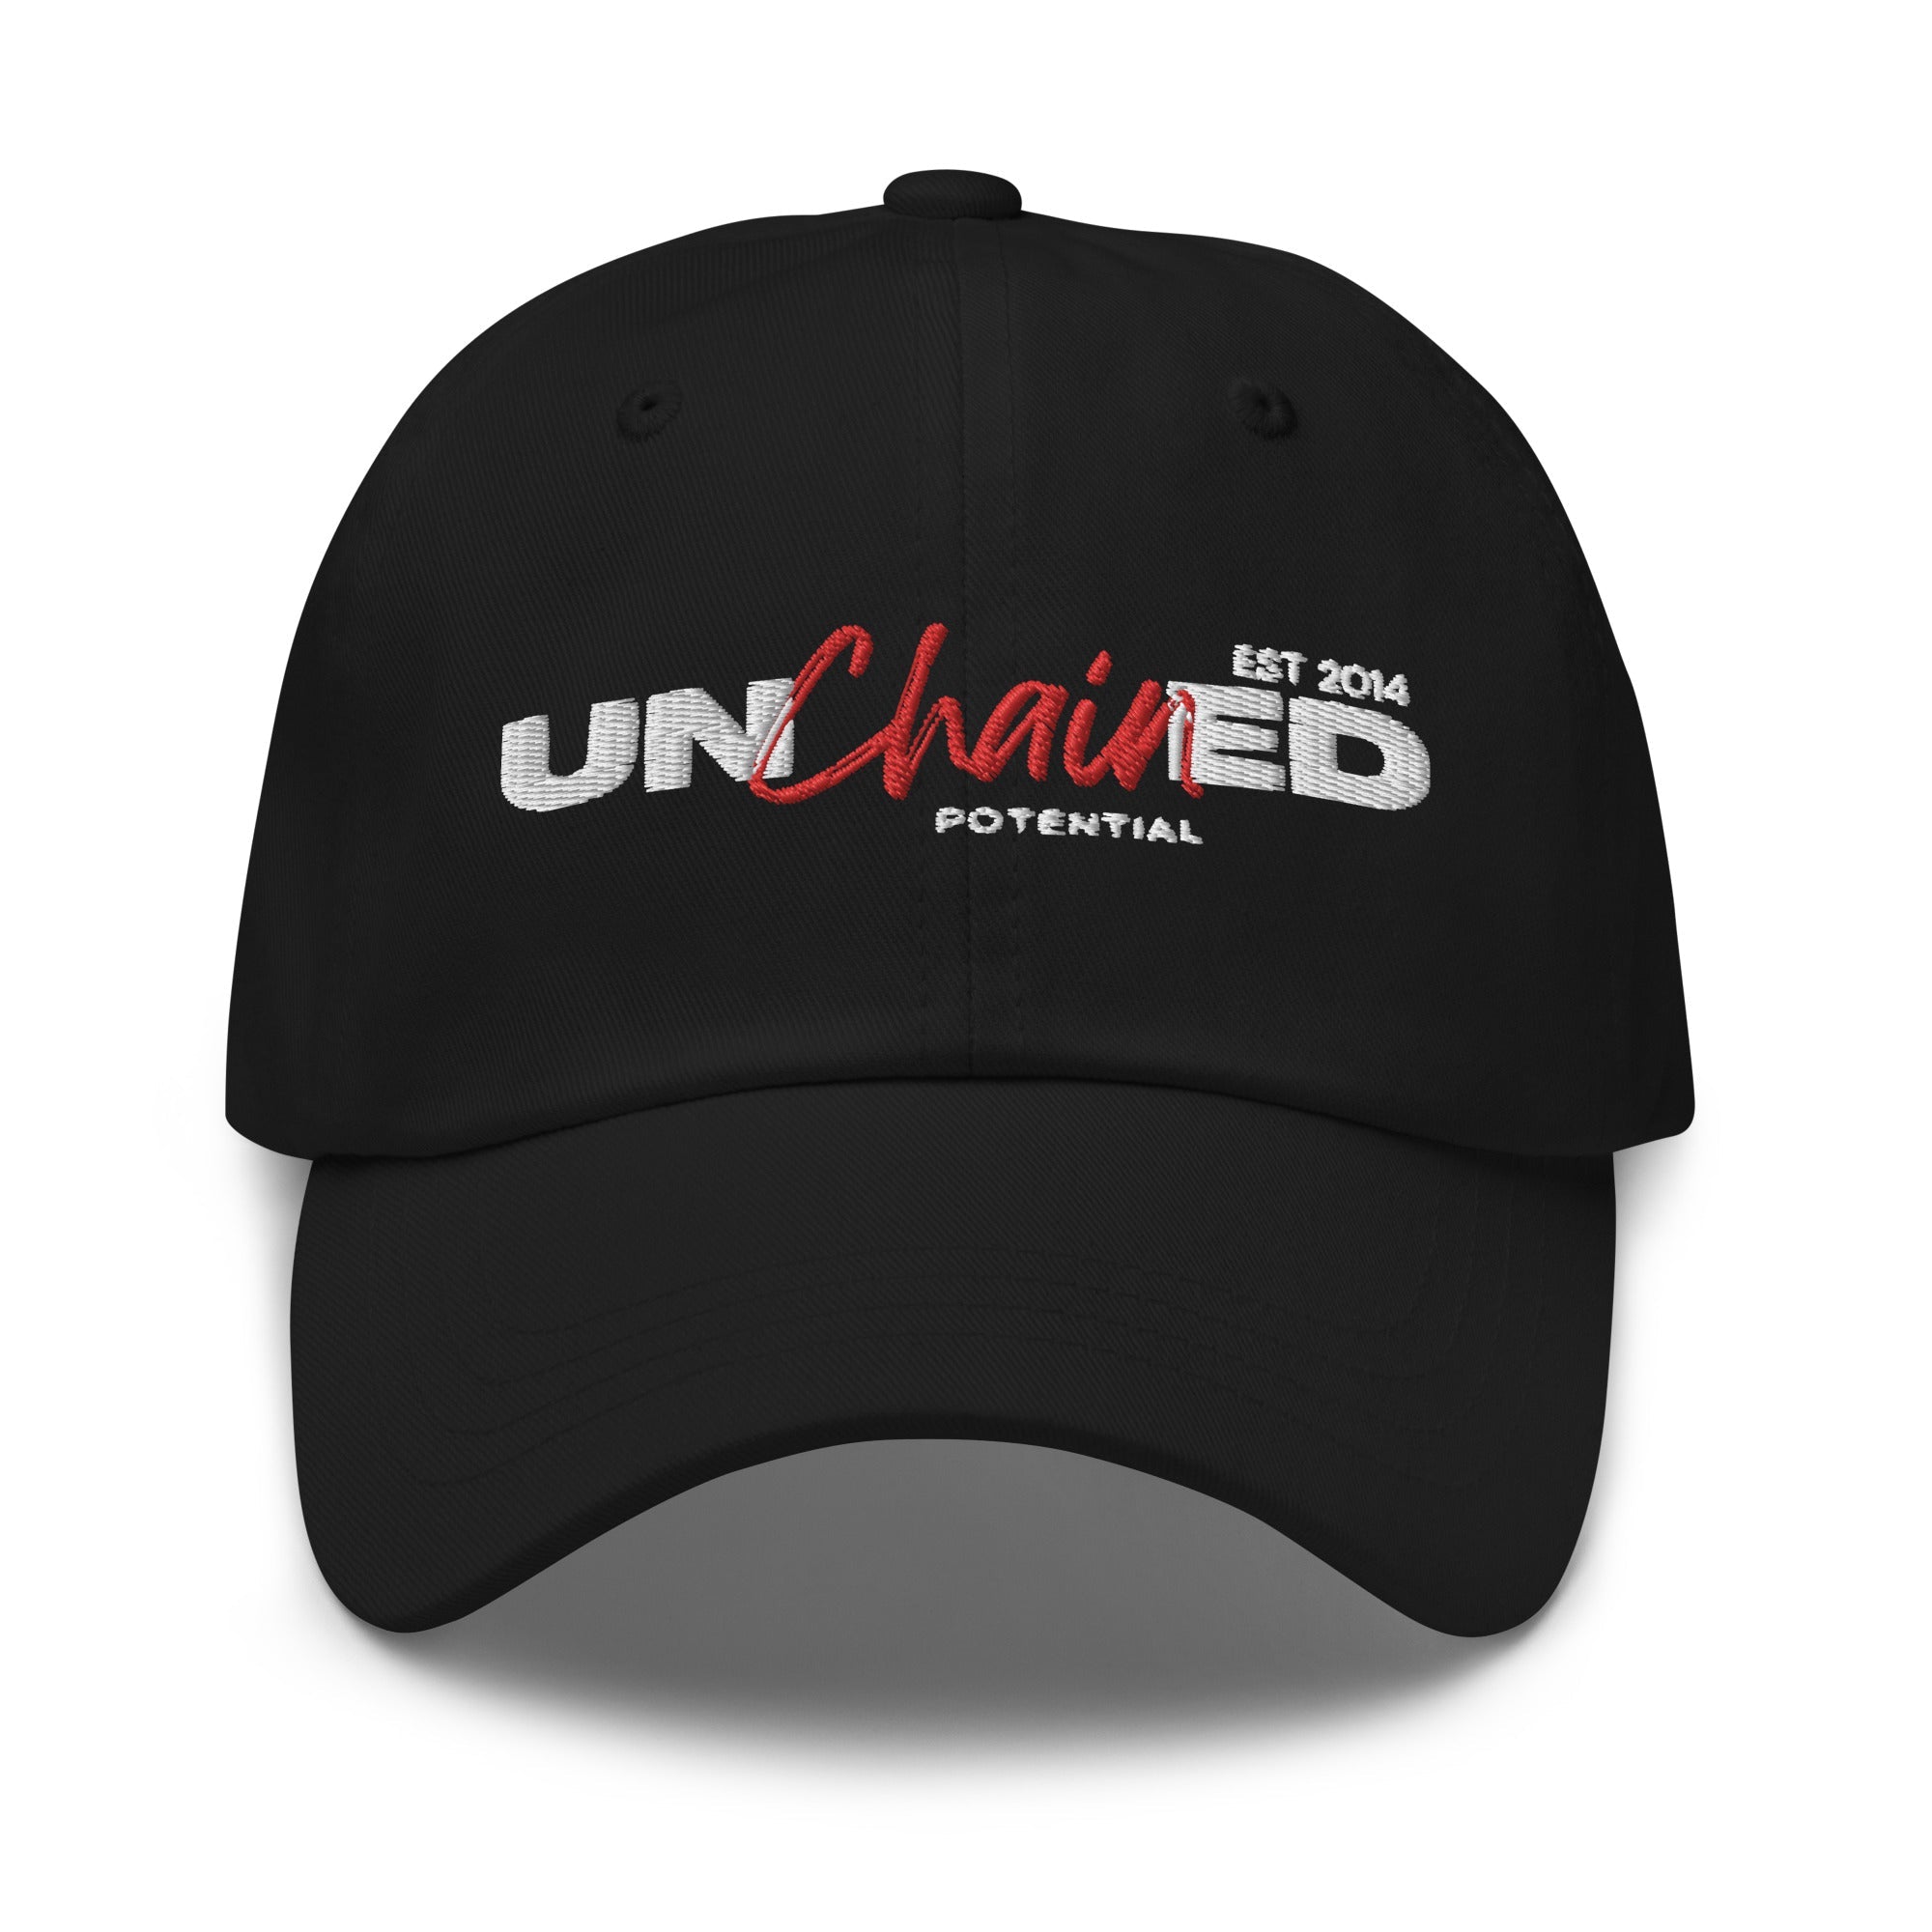 Unchained Potential Dad hat